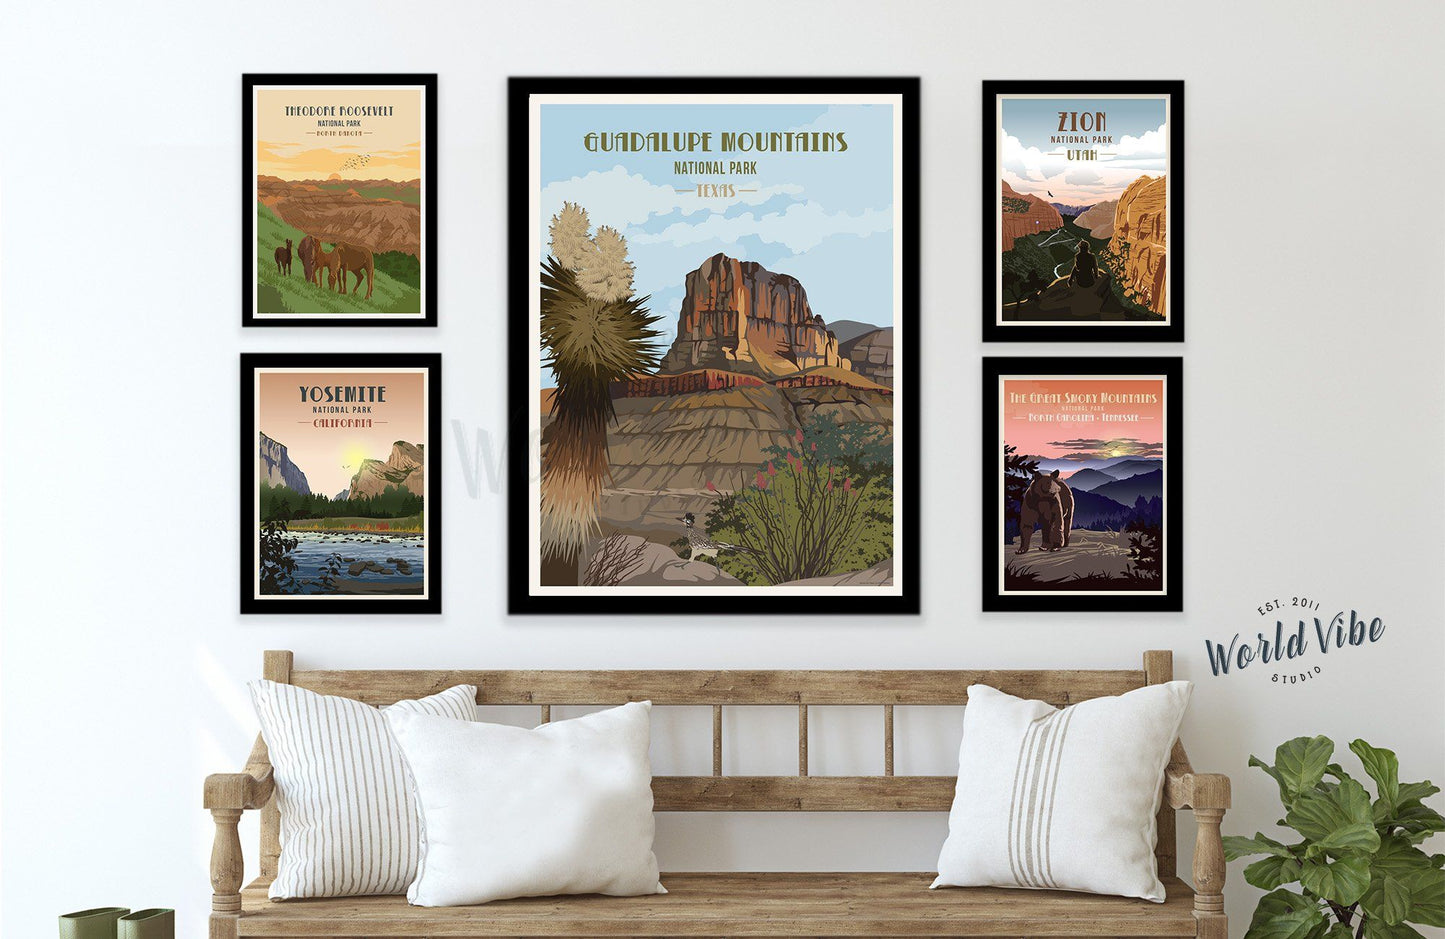 Guadalupe Mountains National Park, Texas, National Park Poster, Unframed Map World Vibe Studio 